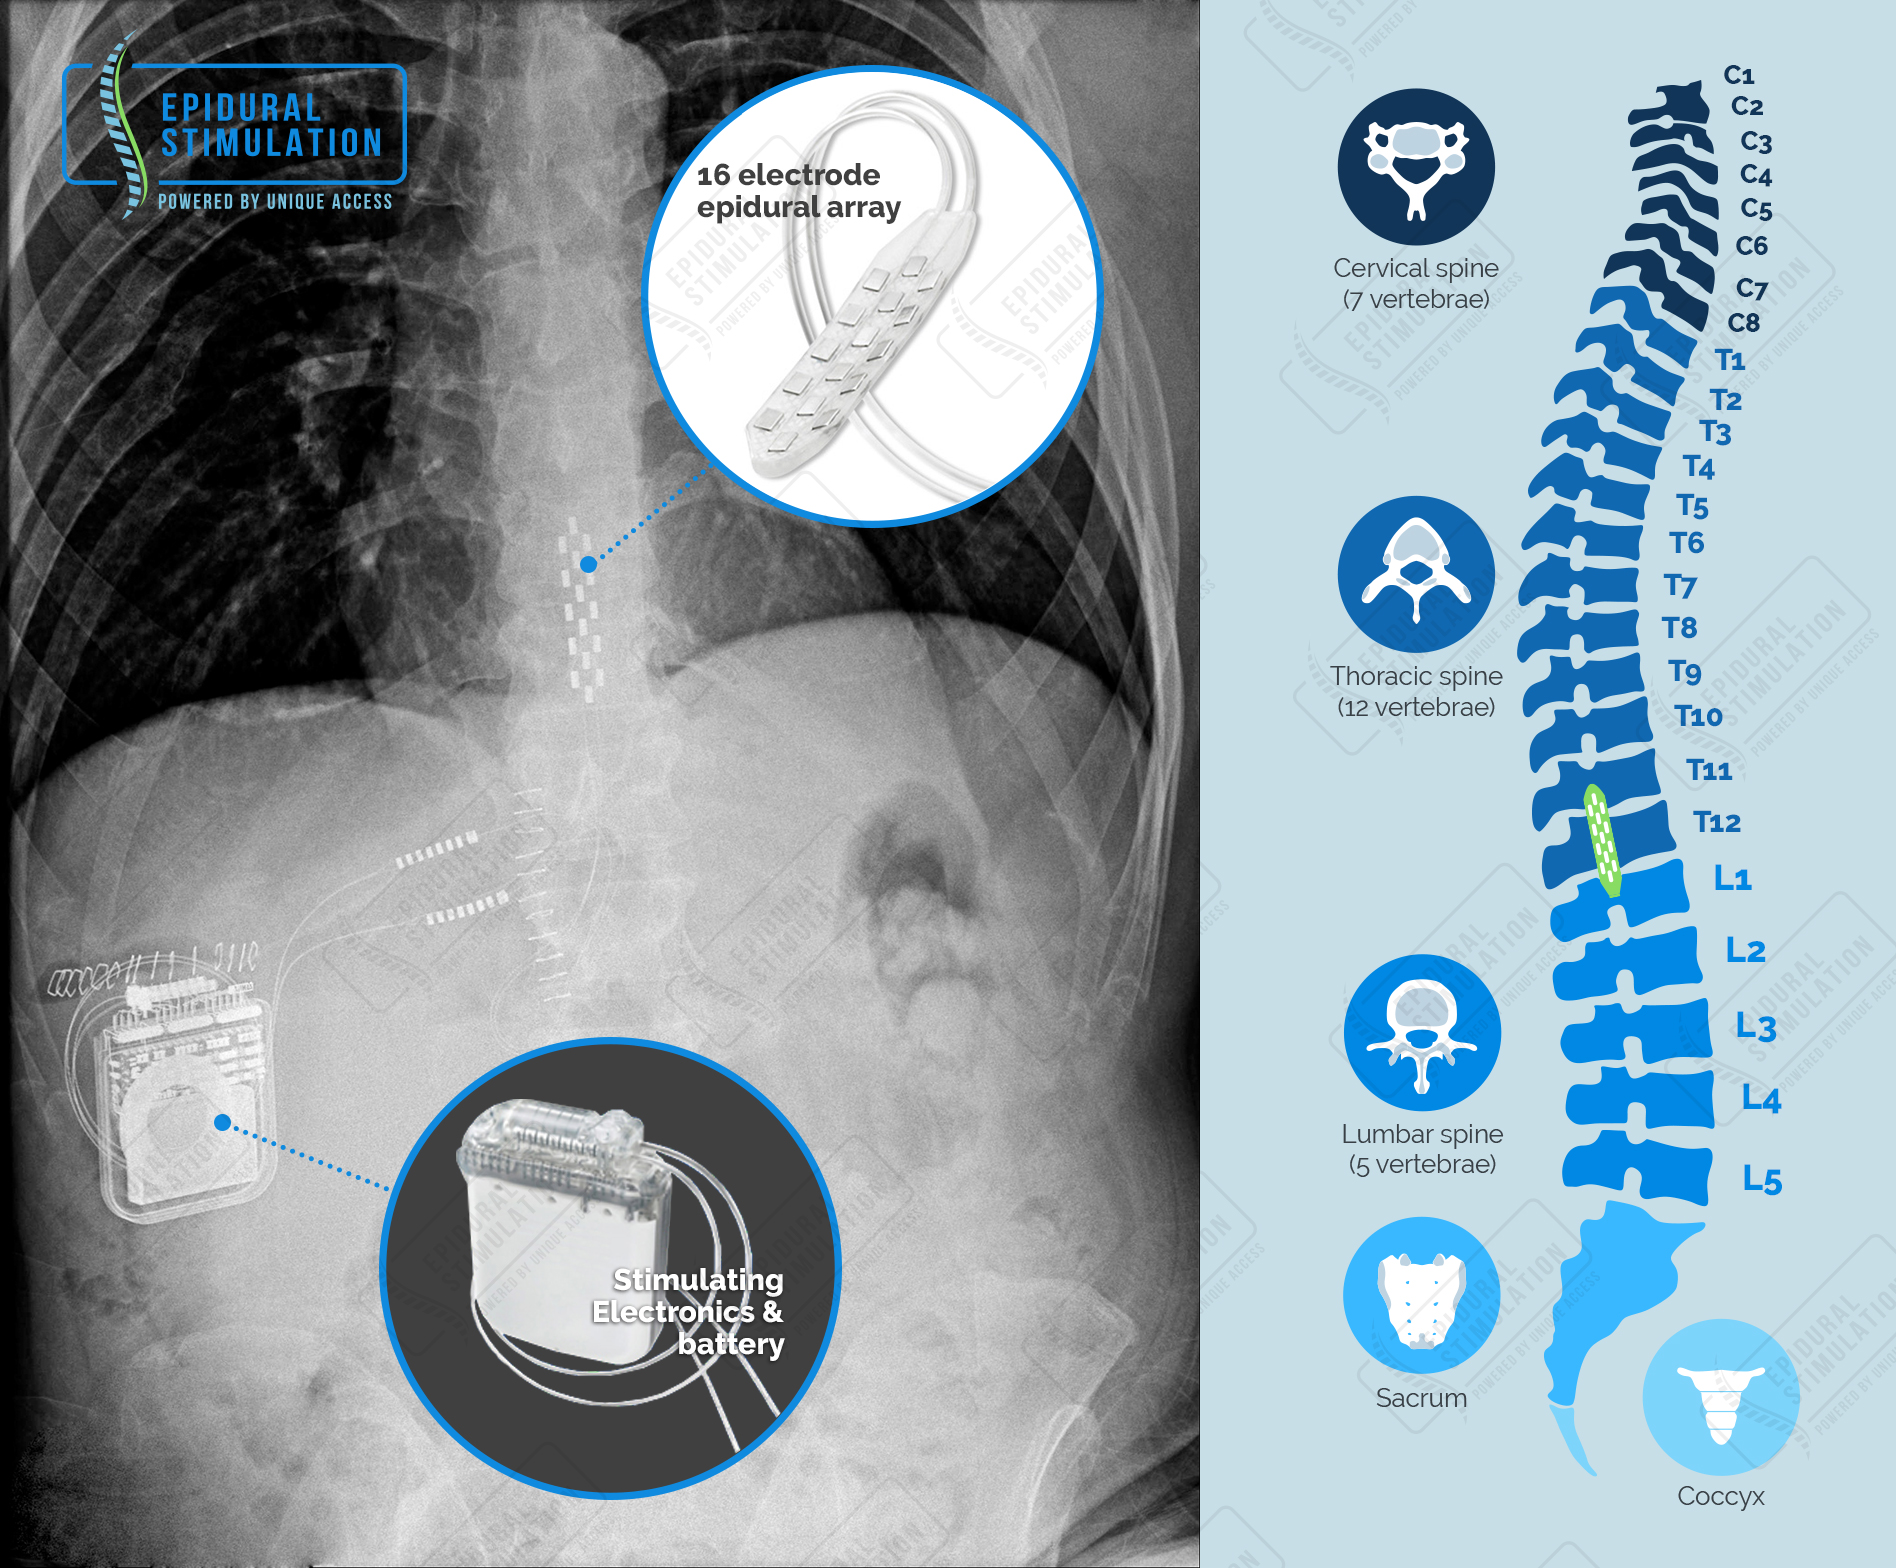 Electrical implant reduces 'invisible' symptoms of man's spinal cord injury Adaptive